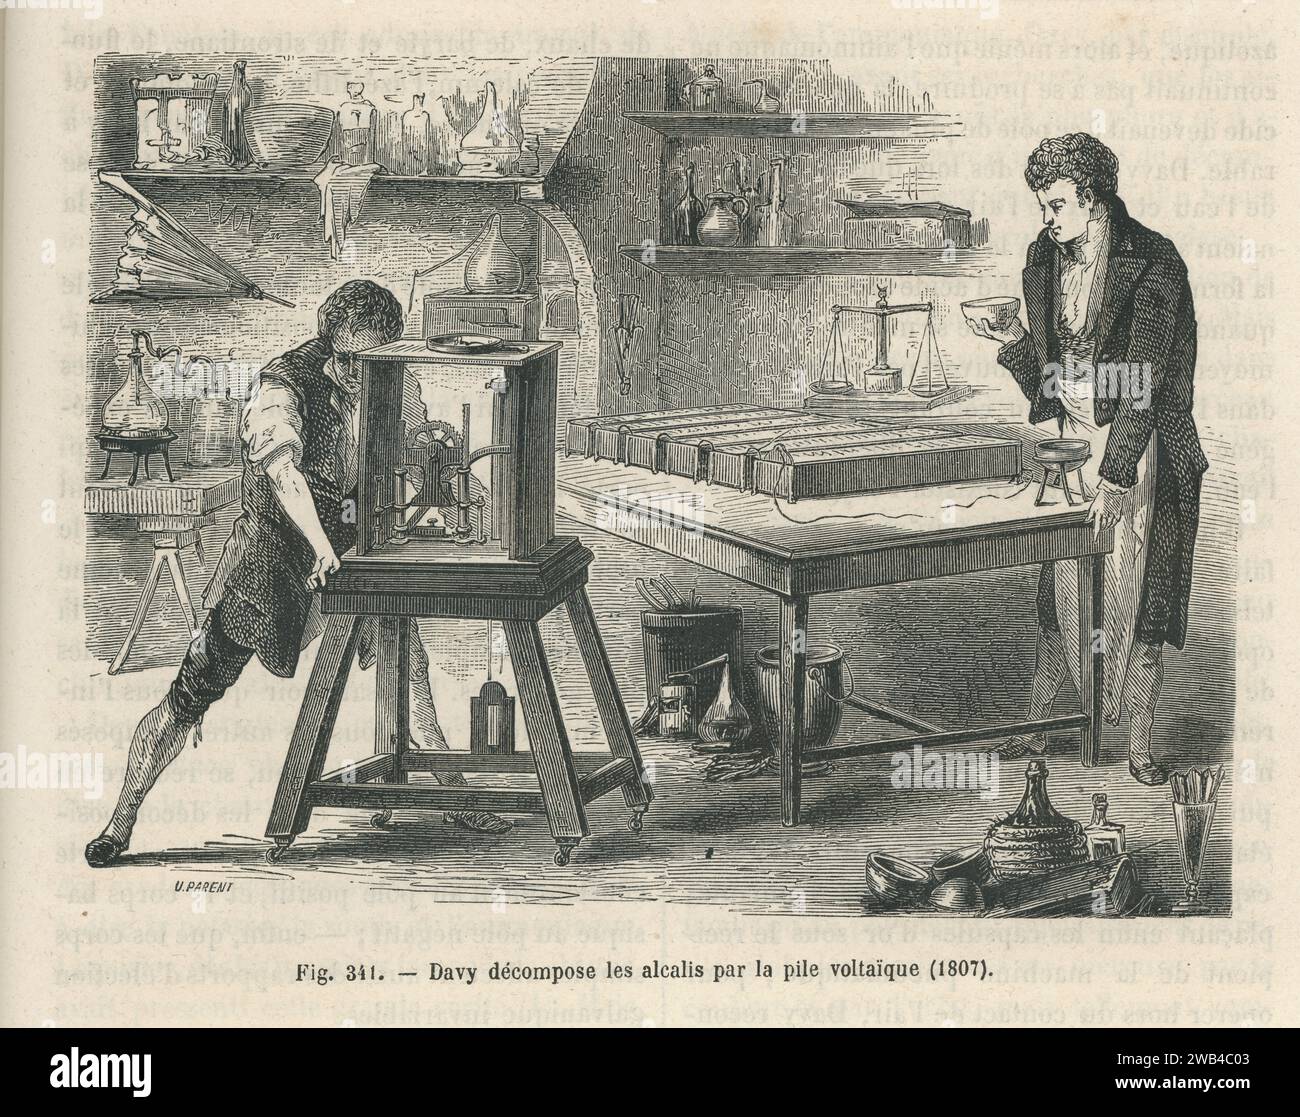 The English physicist and chemist Sir Humphry Davy decomposing alkalis using the voltaic pile.  Early 19th century  Illustration from 'Les Merveilles de la science ou description populaire des inventions modernes' written by Louis Figuier and published in 1867 by Furne, Jouvet et Cie. Stock Photo